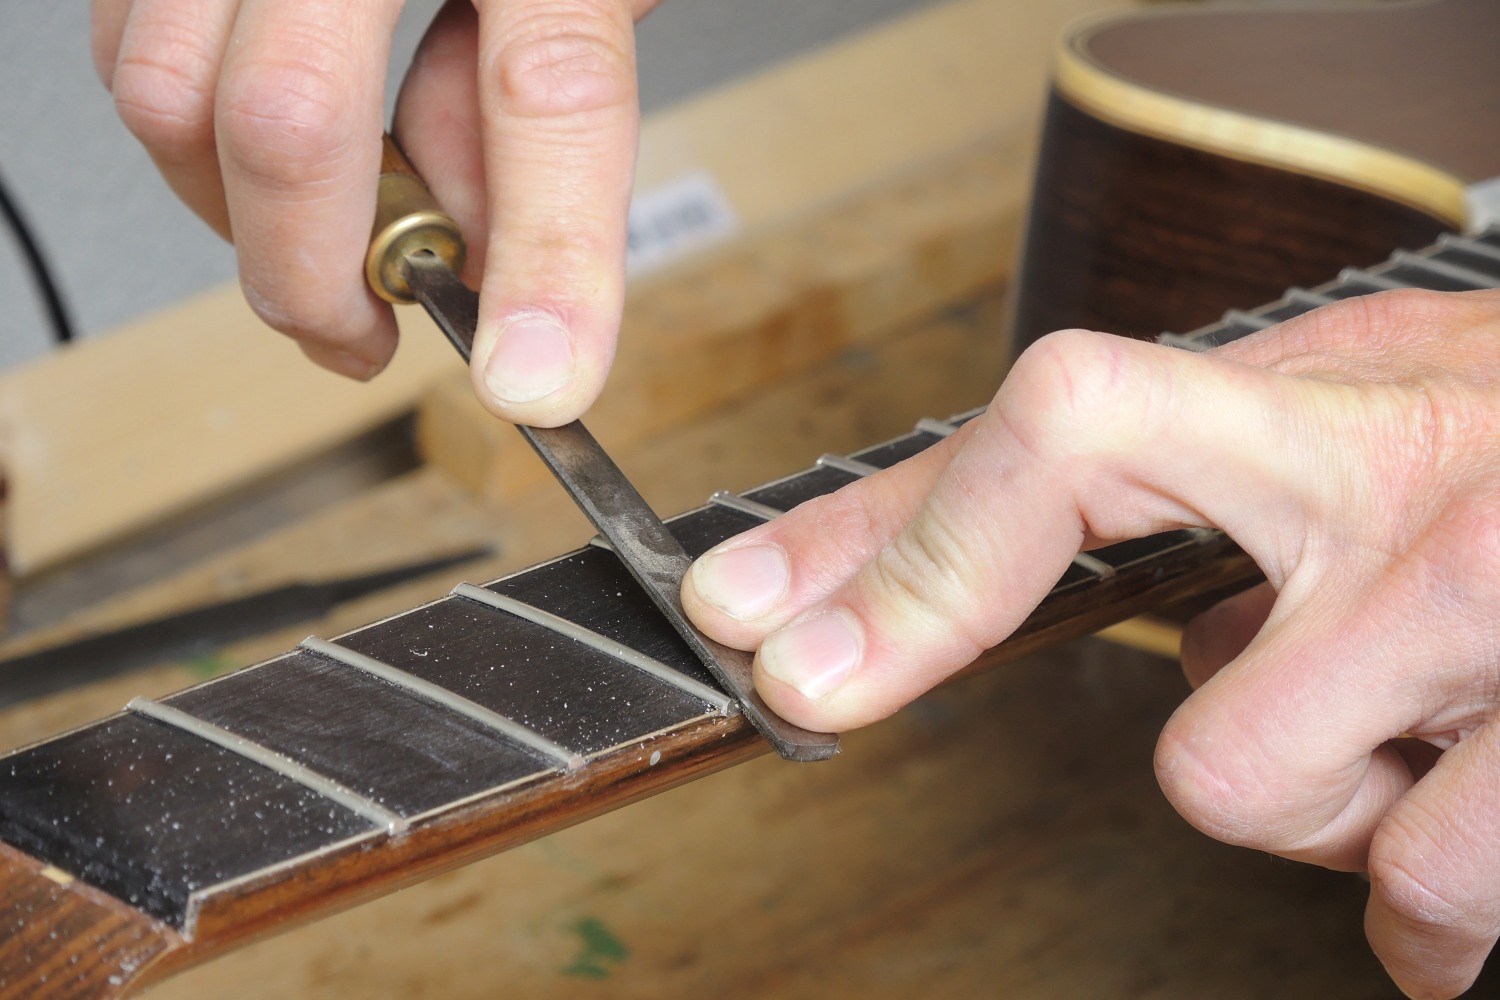 Re-fretting of an acoustic guitar - The lateral burr created by flush filing is removed